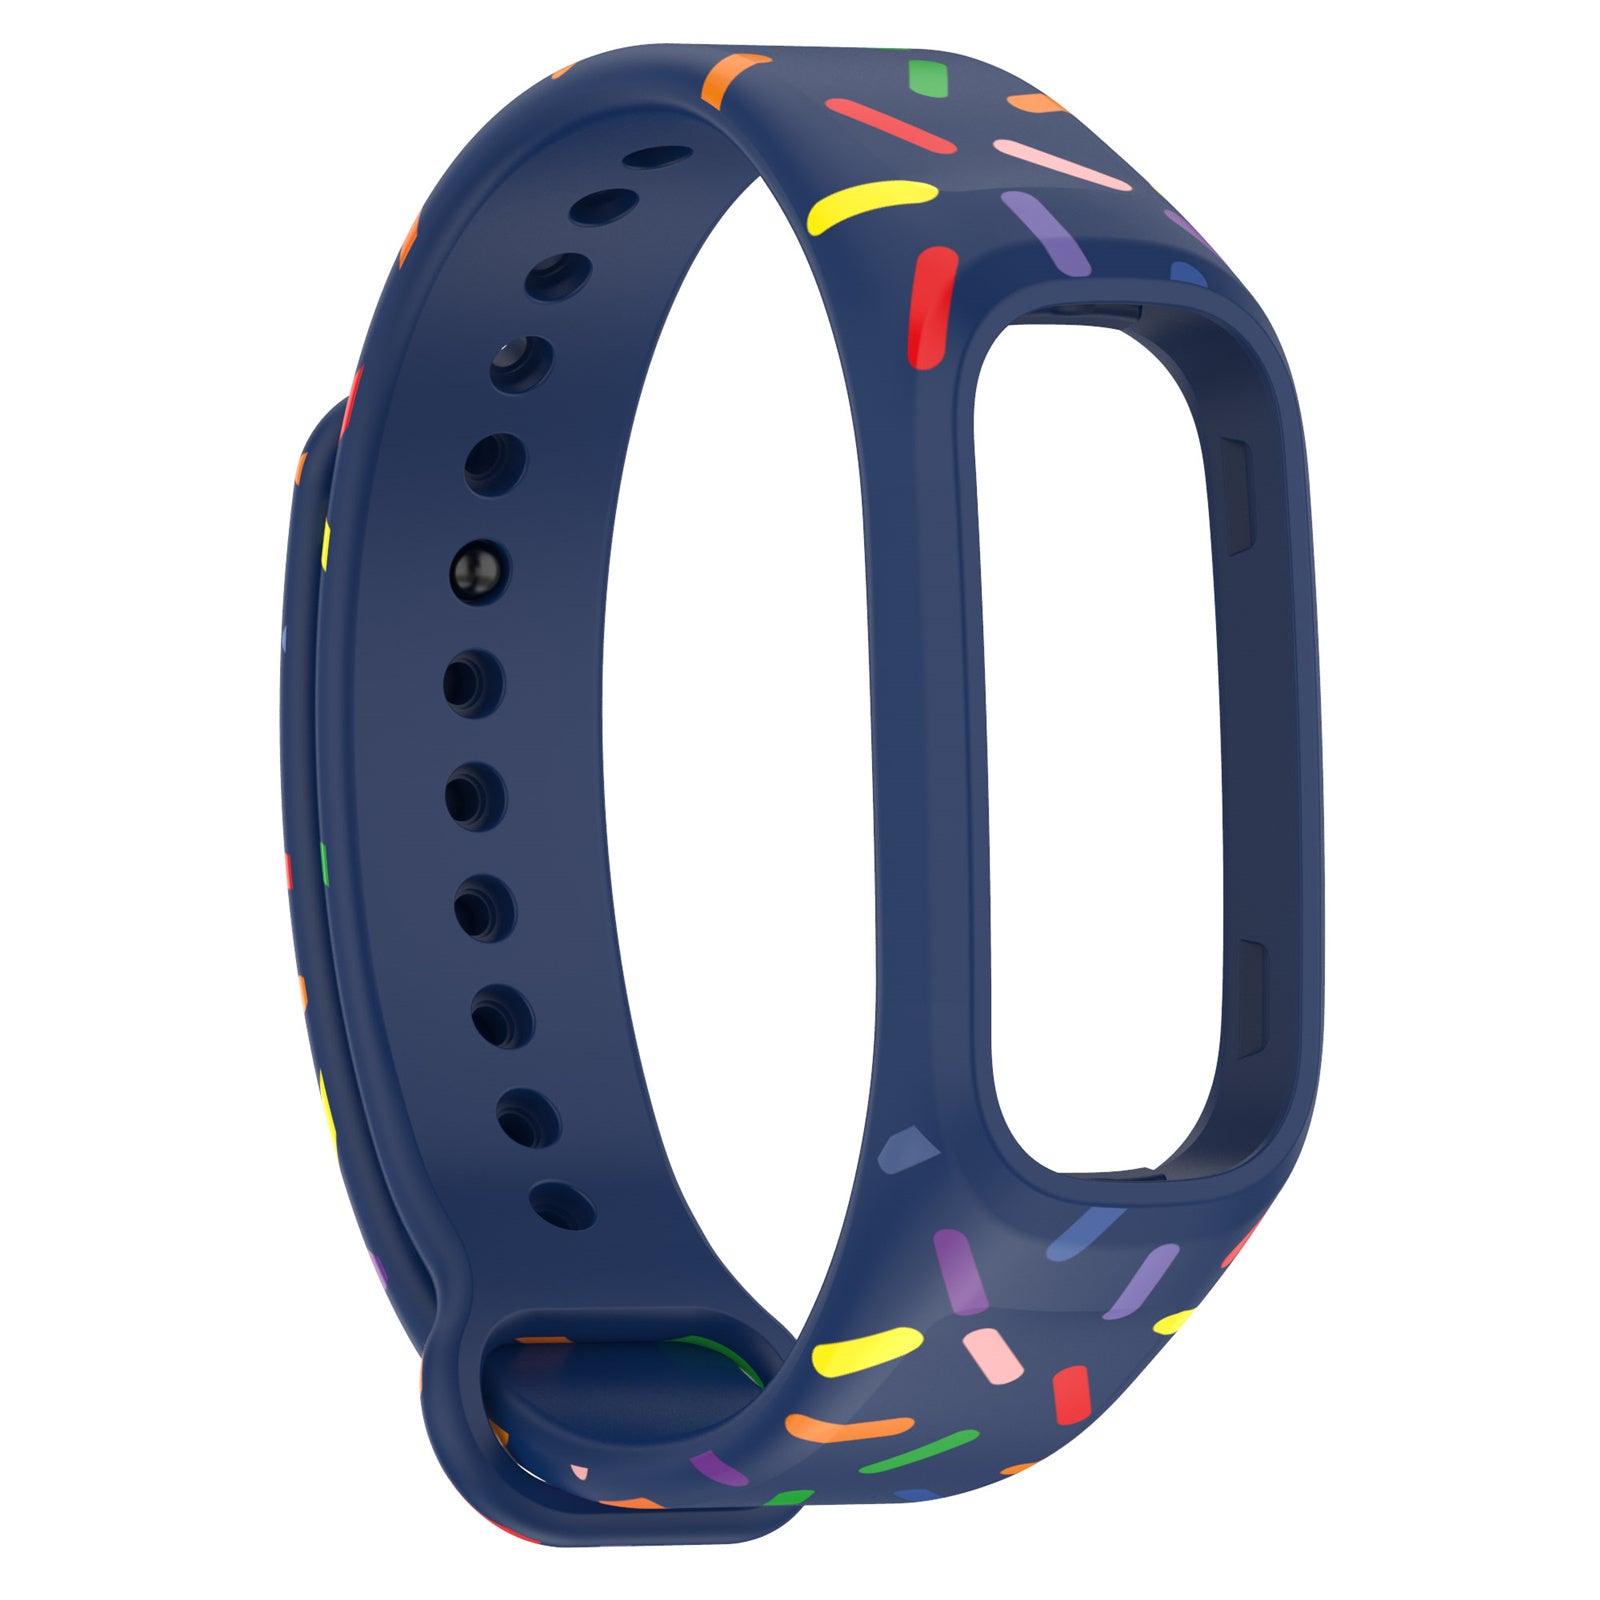 Uniqkart for Oppo Band Integrated Silicone Strap Watch Case Colorful Spotted Wrist Band - Midnight Blue